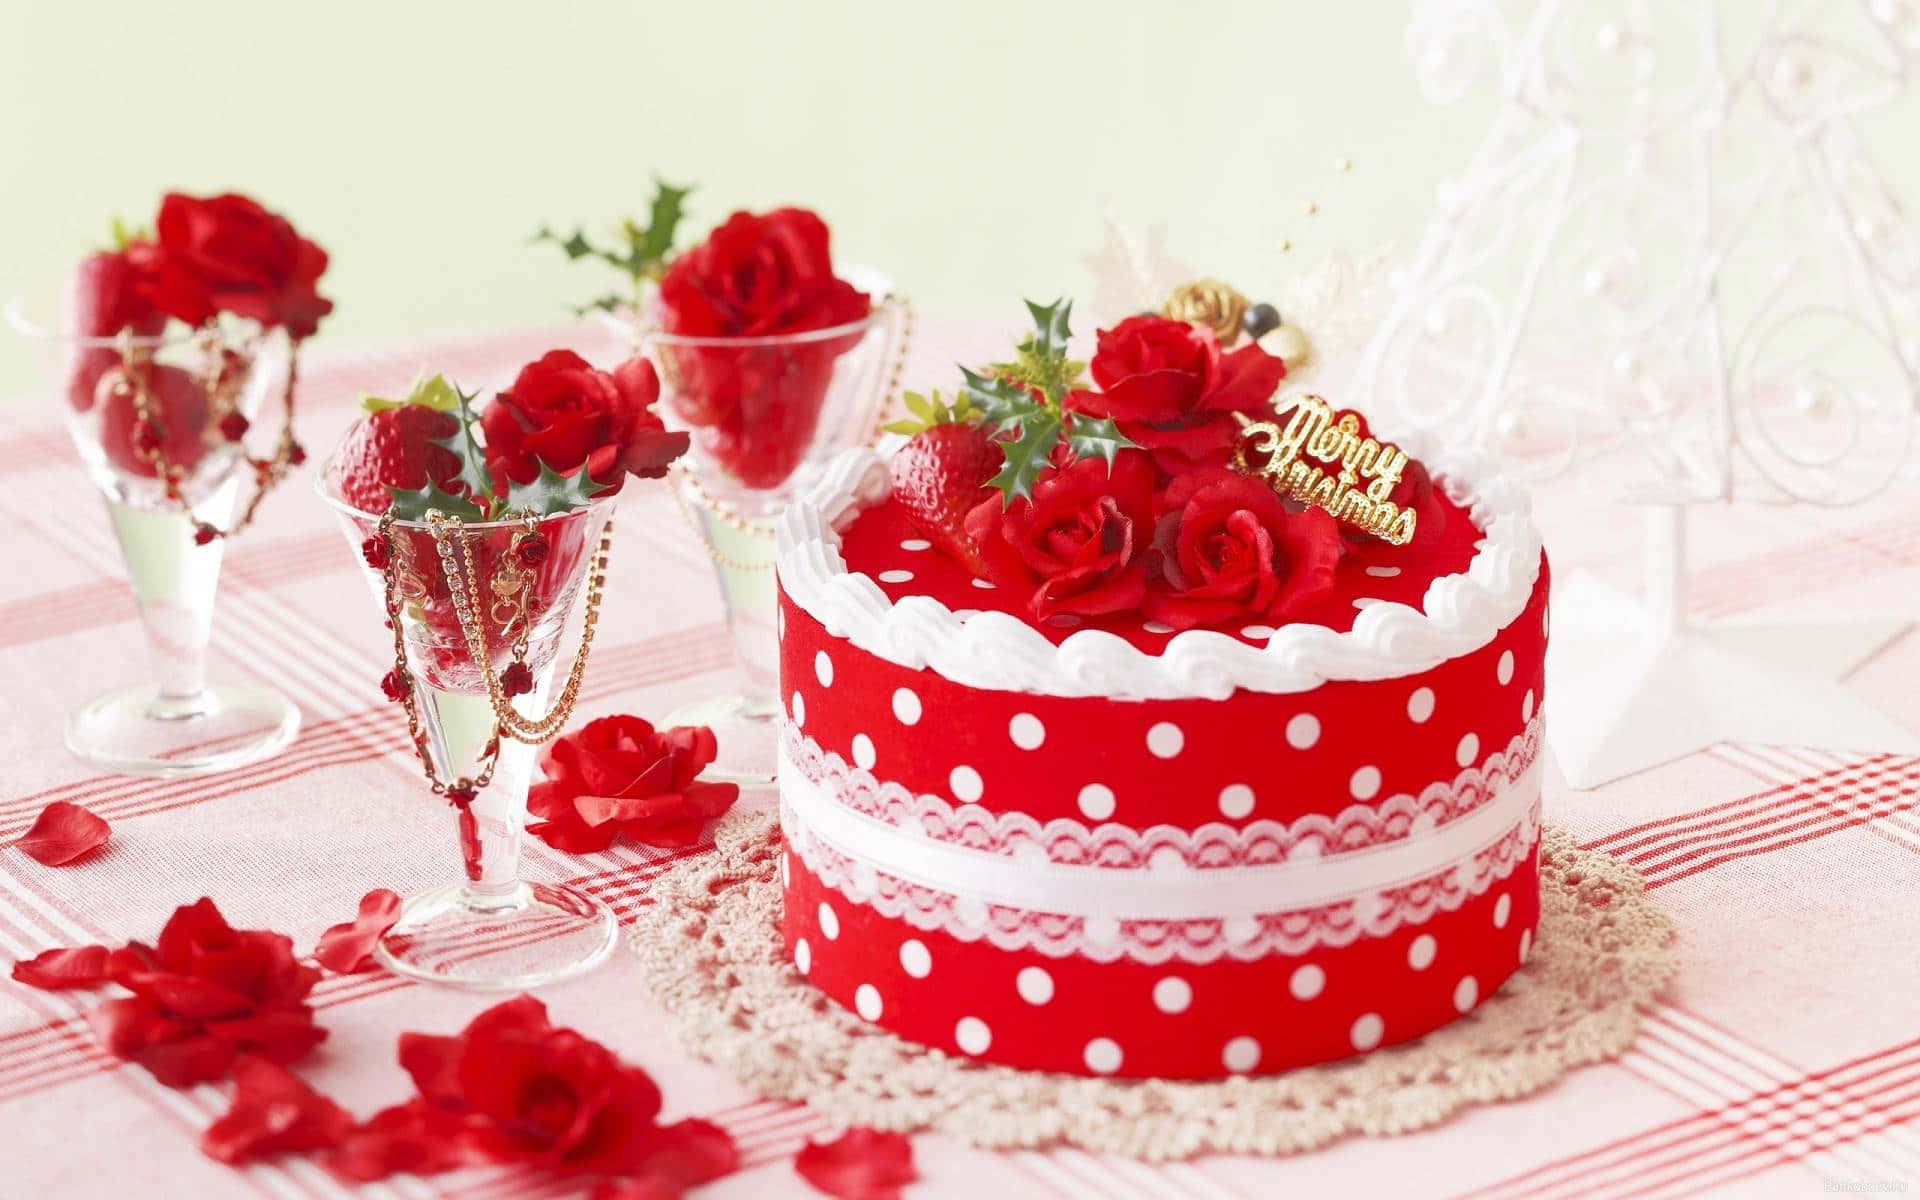 How to make Elegant Red Cake with Flowers - YouTube